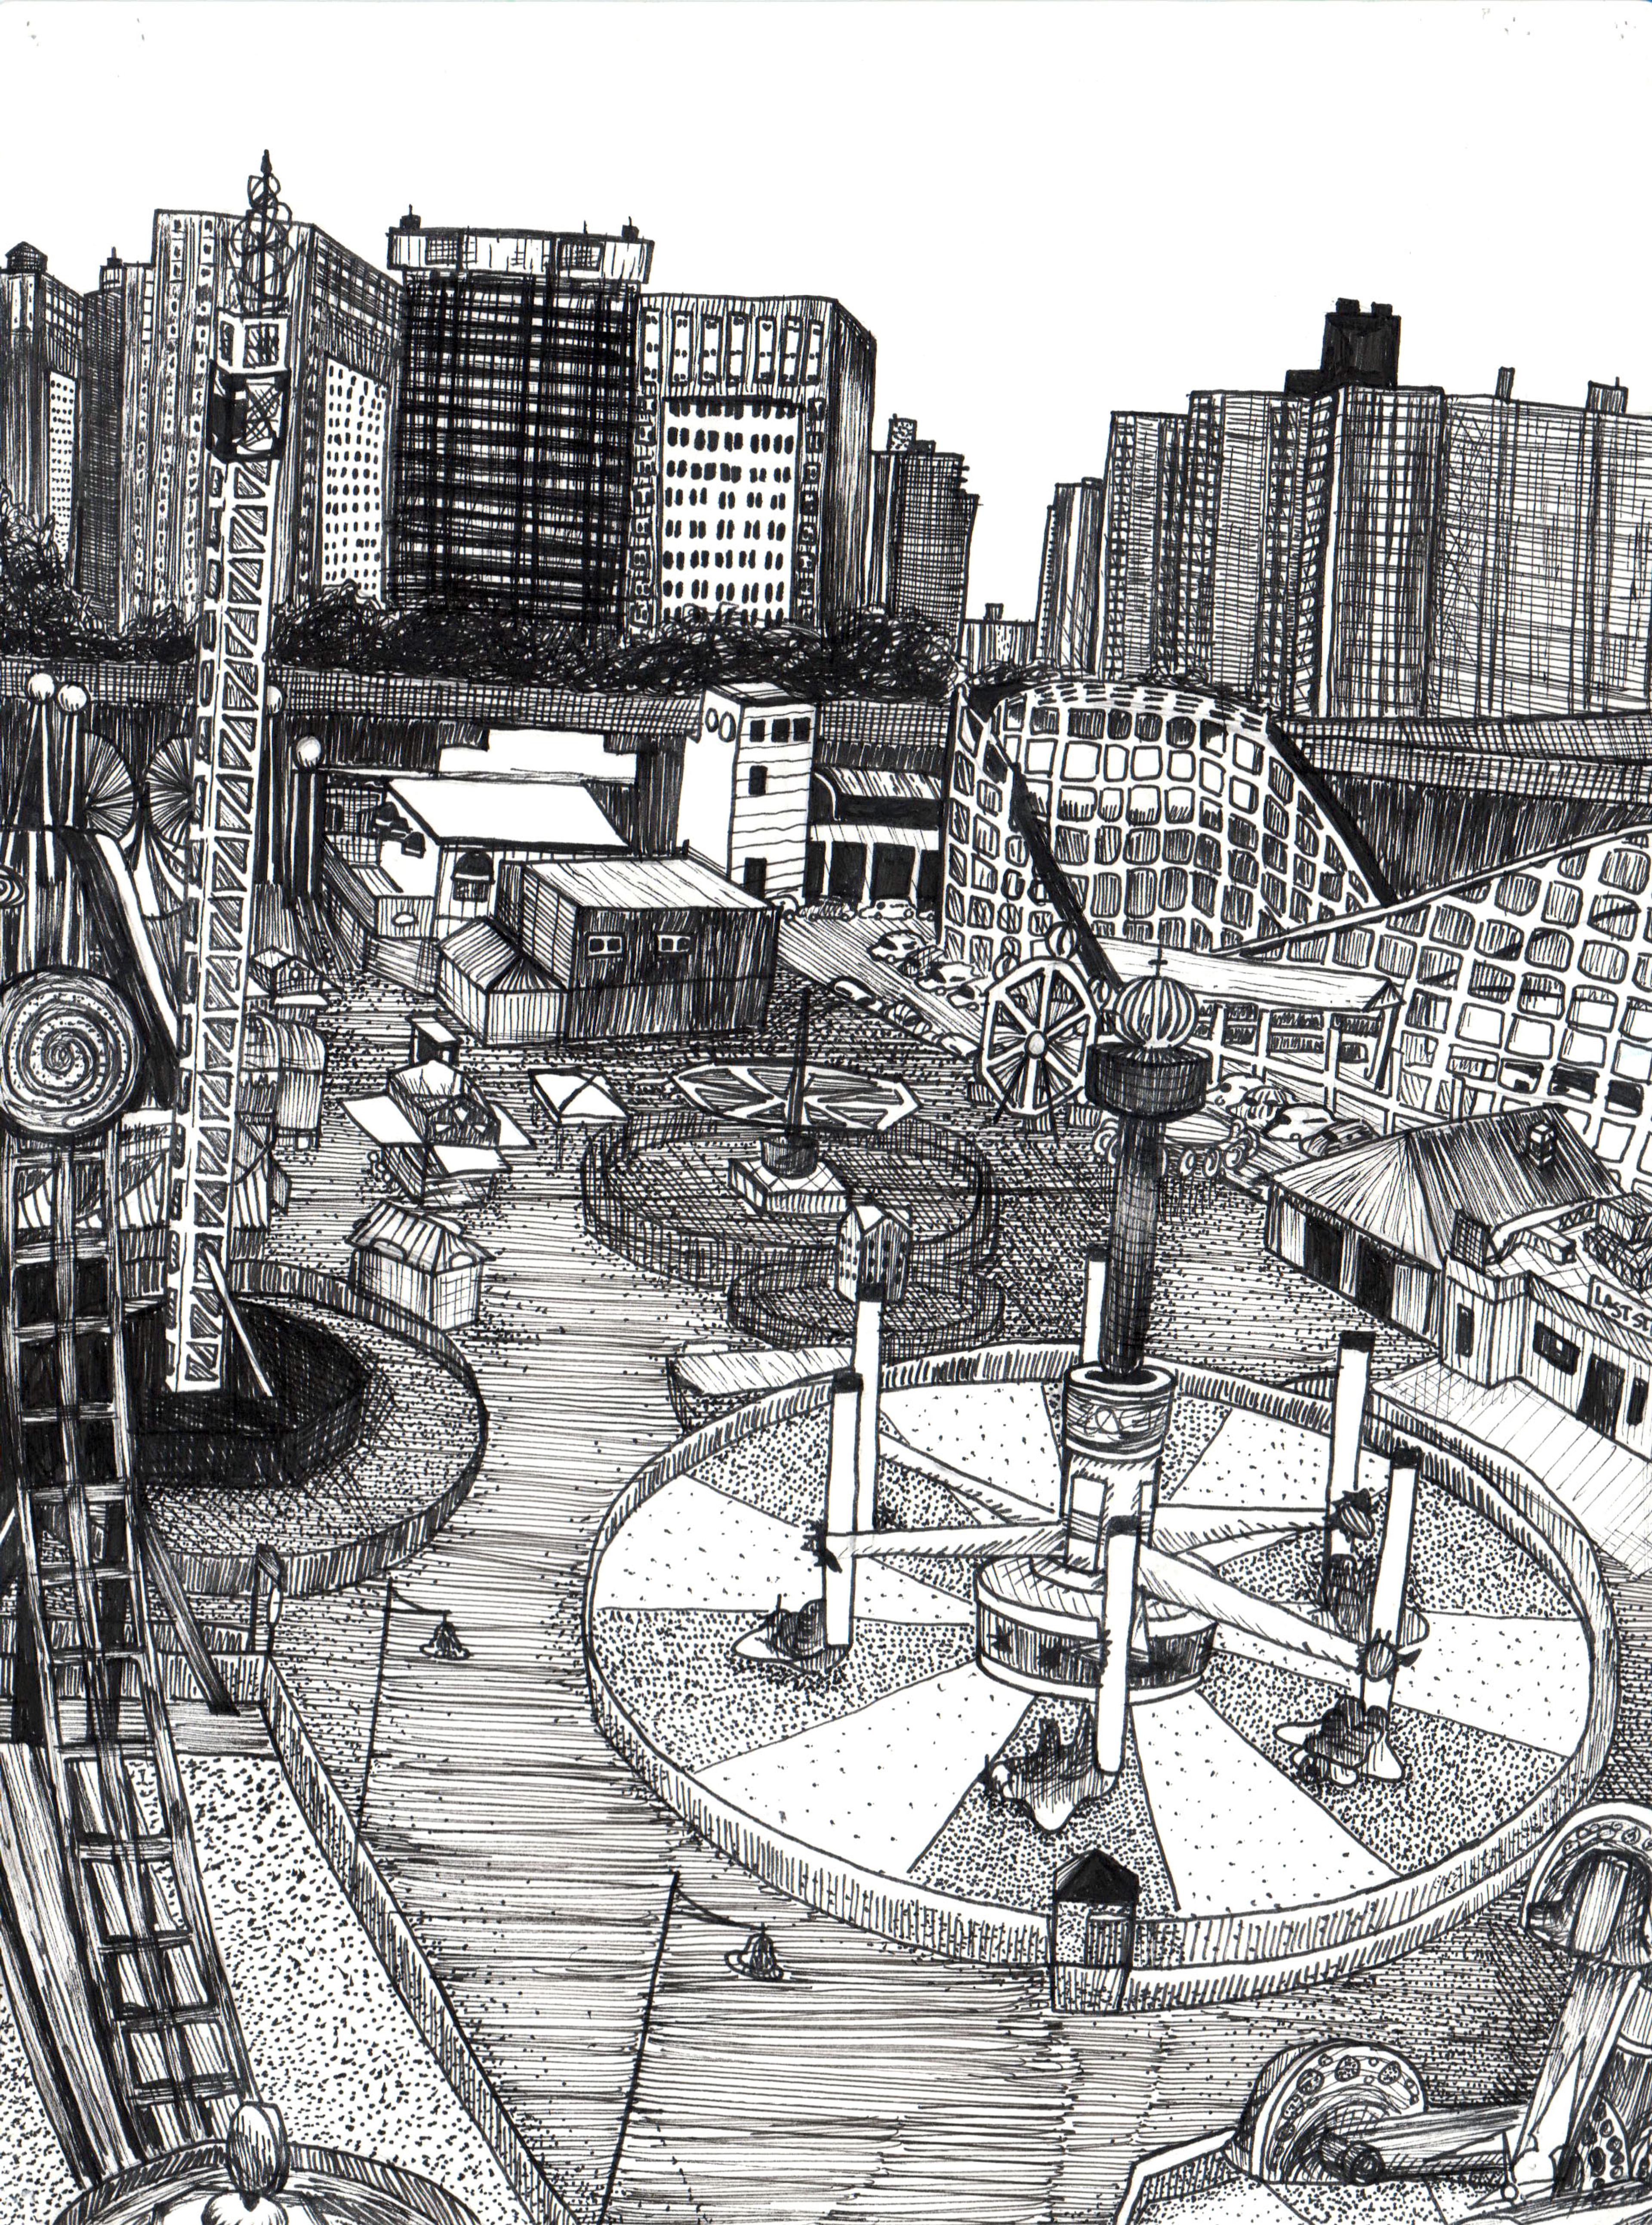 Pen-and-ink drawing of an overhead view of the Coney Island amusement park. Various rides and concession booths are shown in the foreground, with the wooden Cyclone roller coaster appearing prominently in the background to the right. A skyline of high rise apartment buildings fills the horizon in the distance.